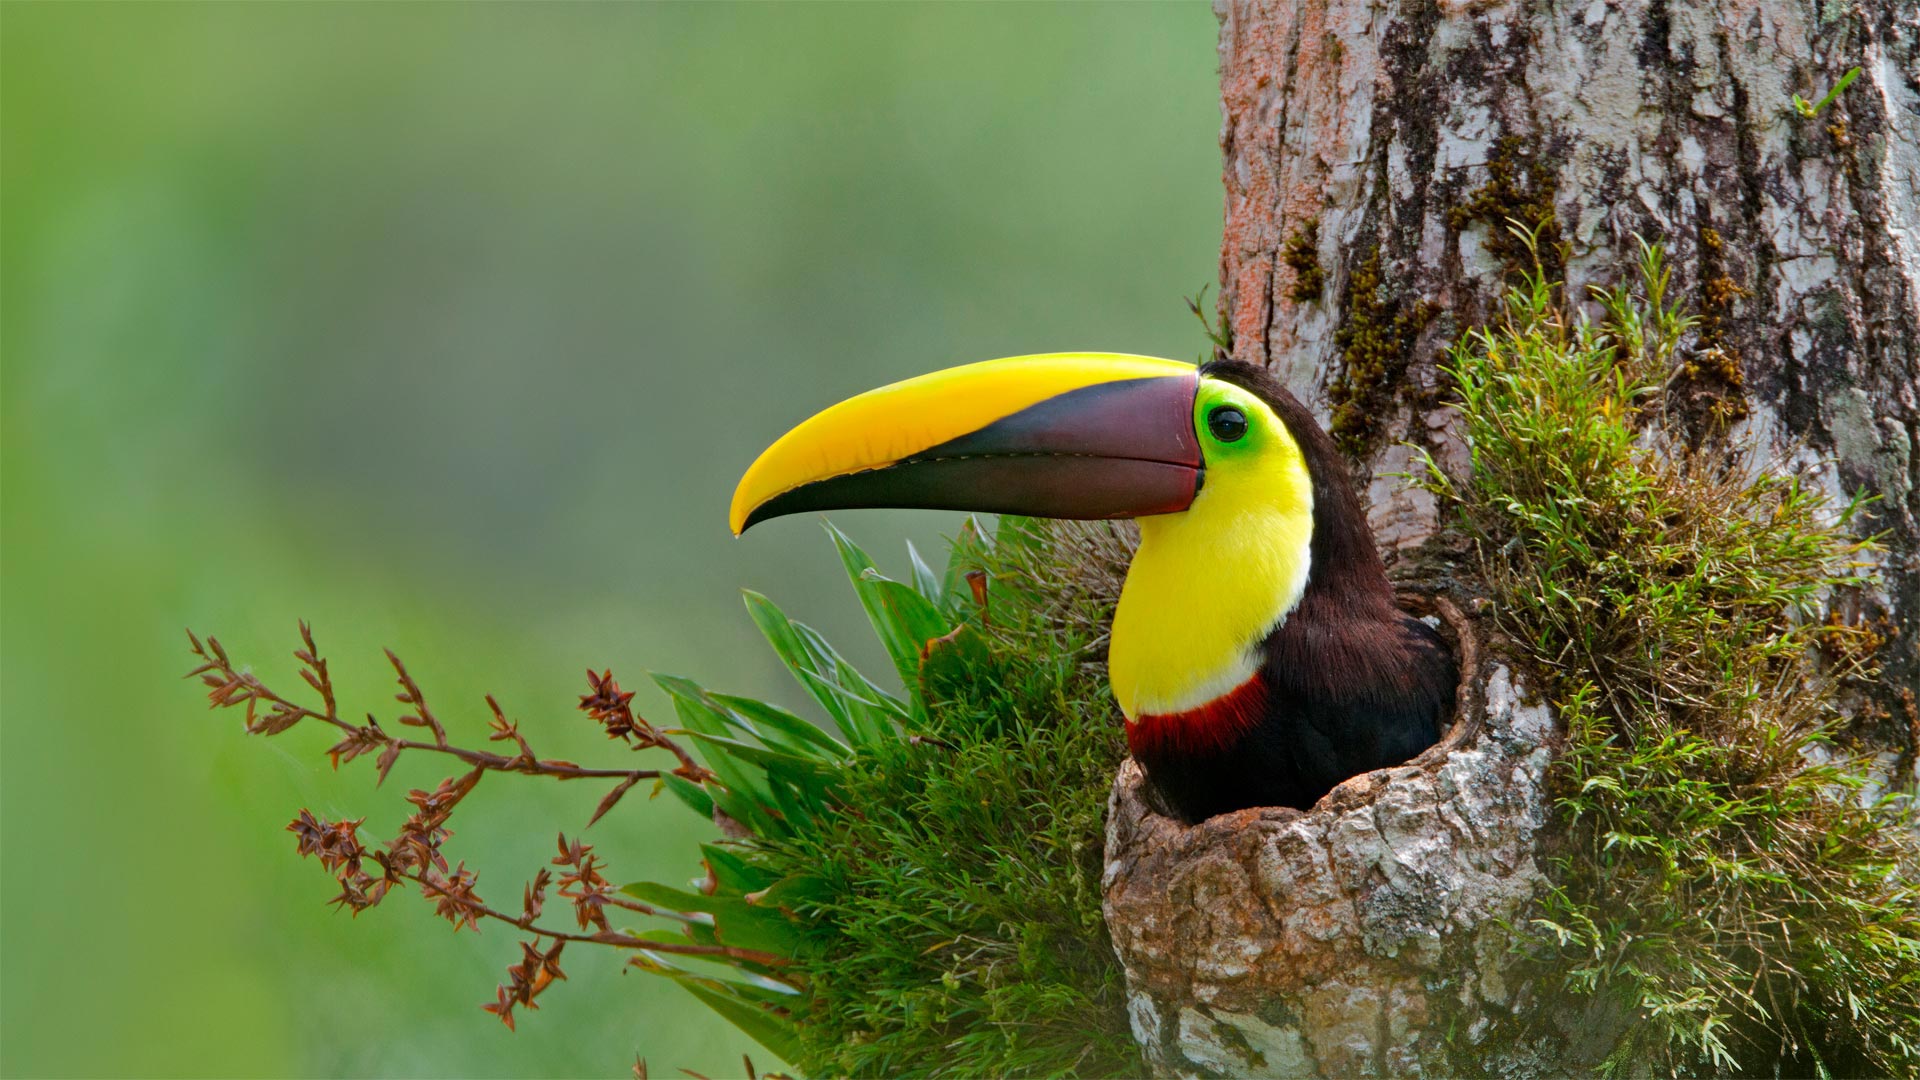 Chestnut-mandibled toucan nesting in the cavity of a tree, Costa Rica - Greg Basco